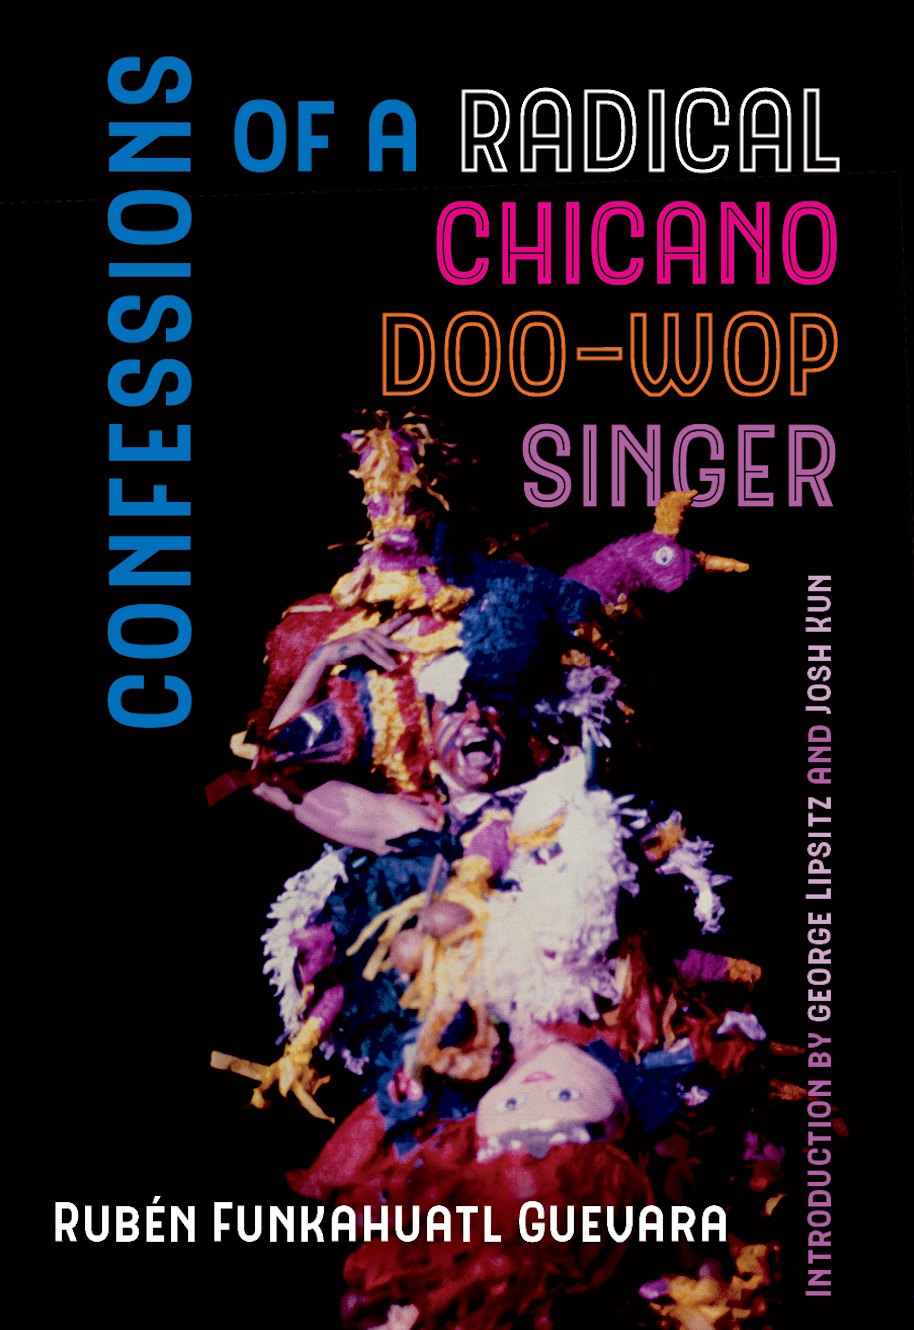 Confessions of a Radical Chicano Doo-Wop Singer by Rubén Funkahuatl Guevara